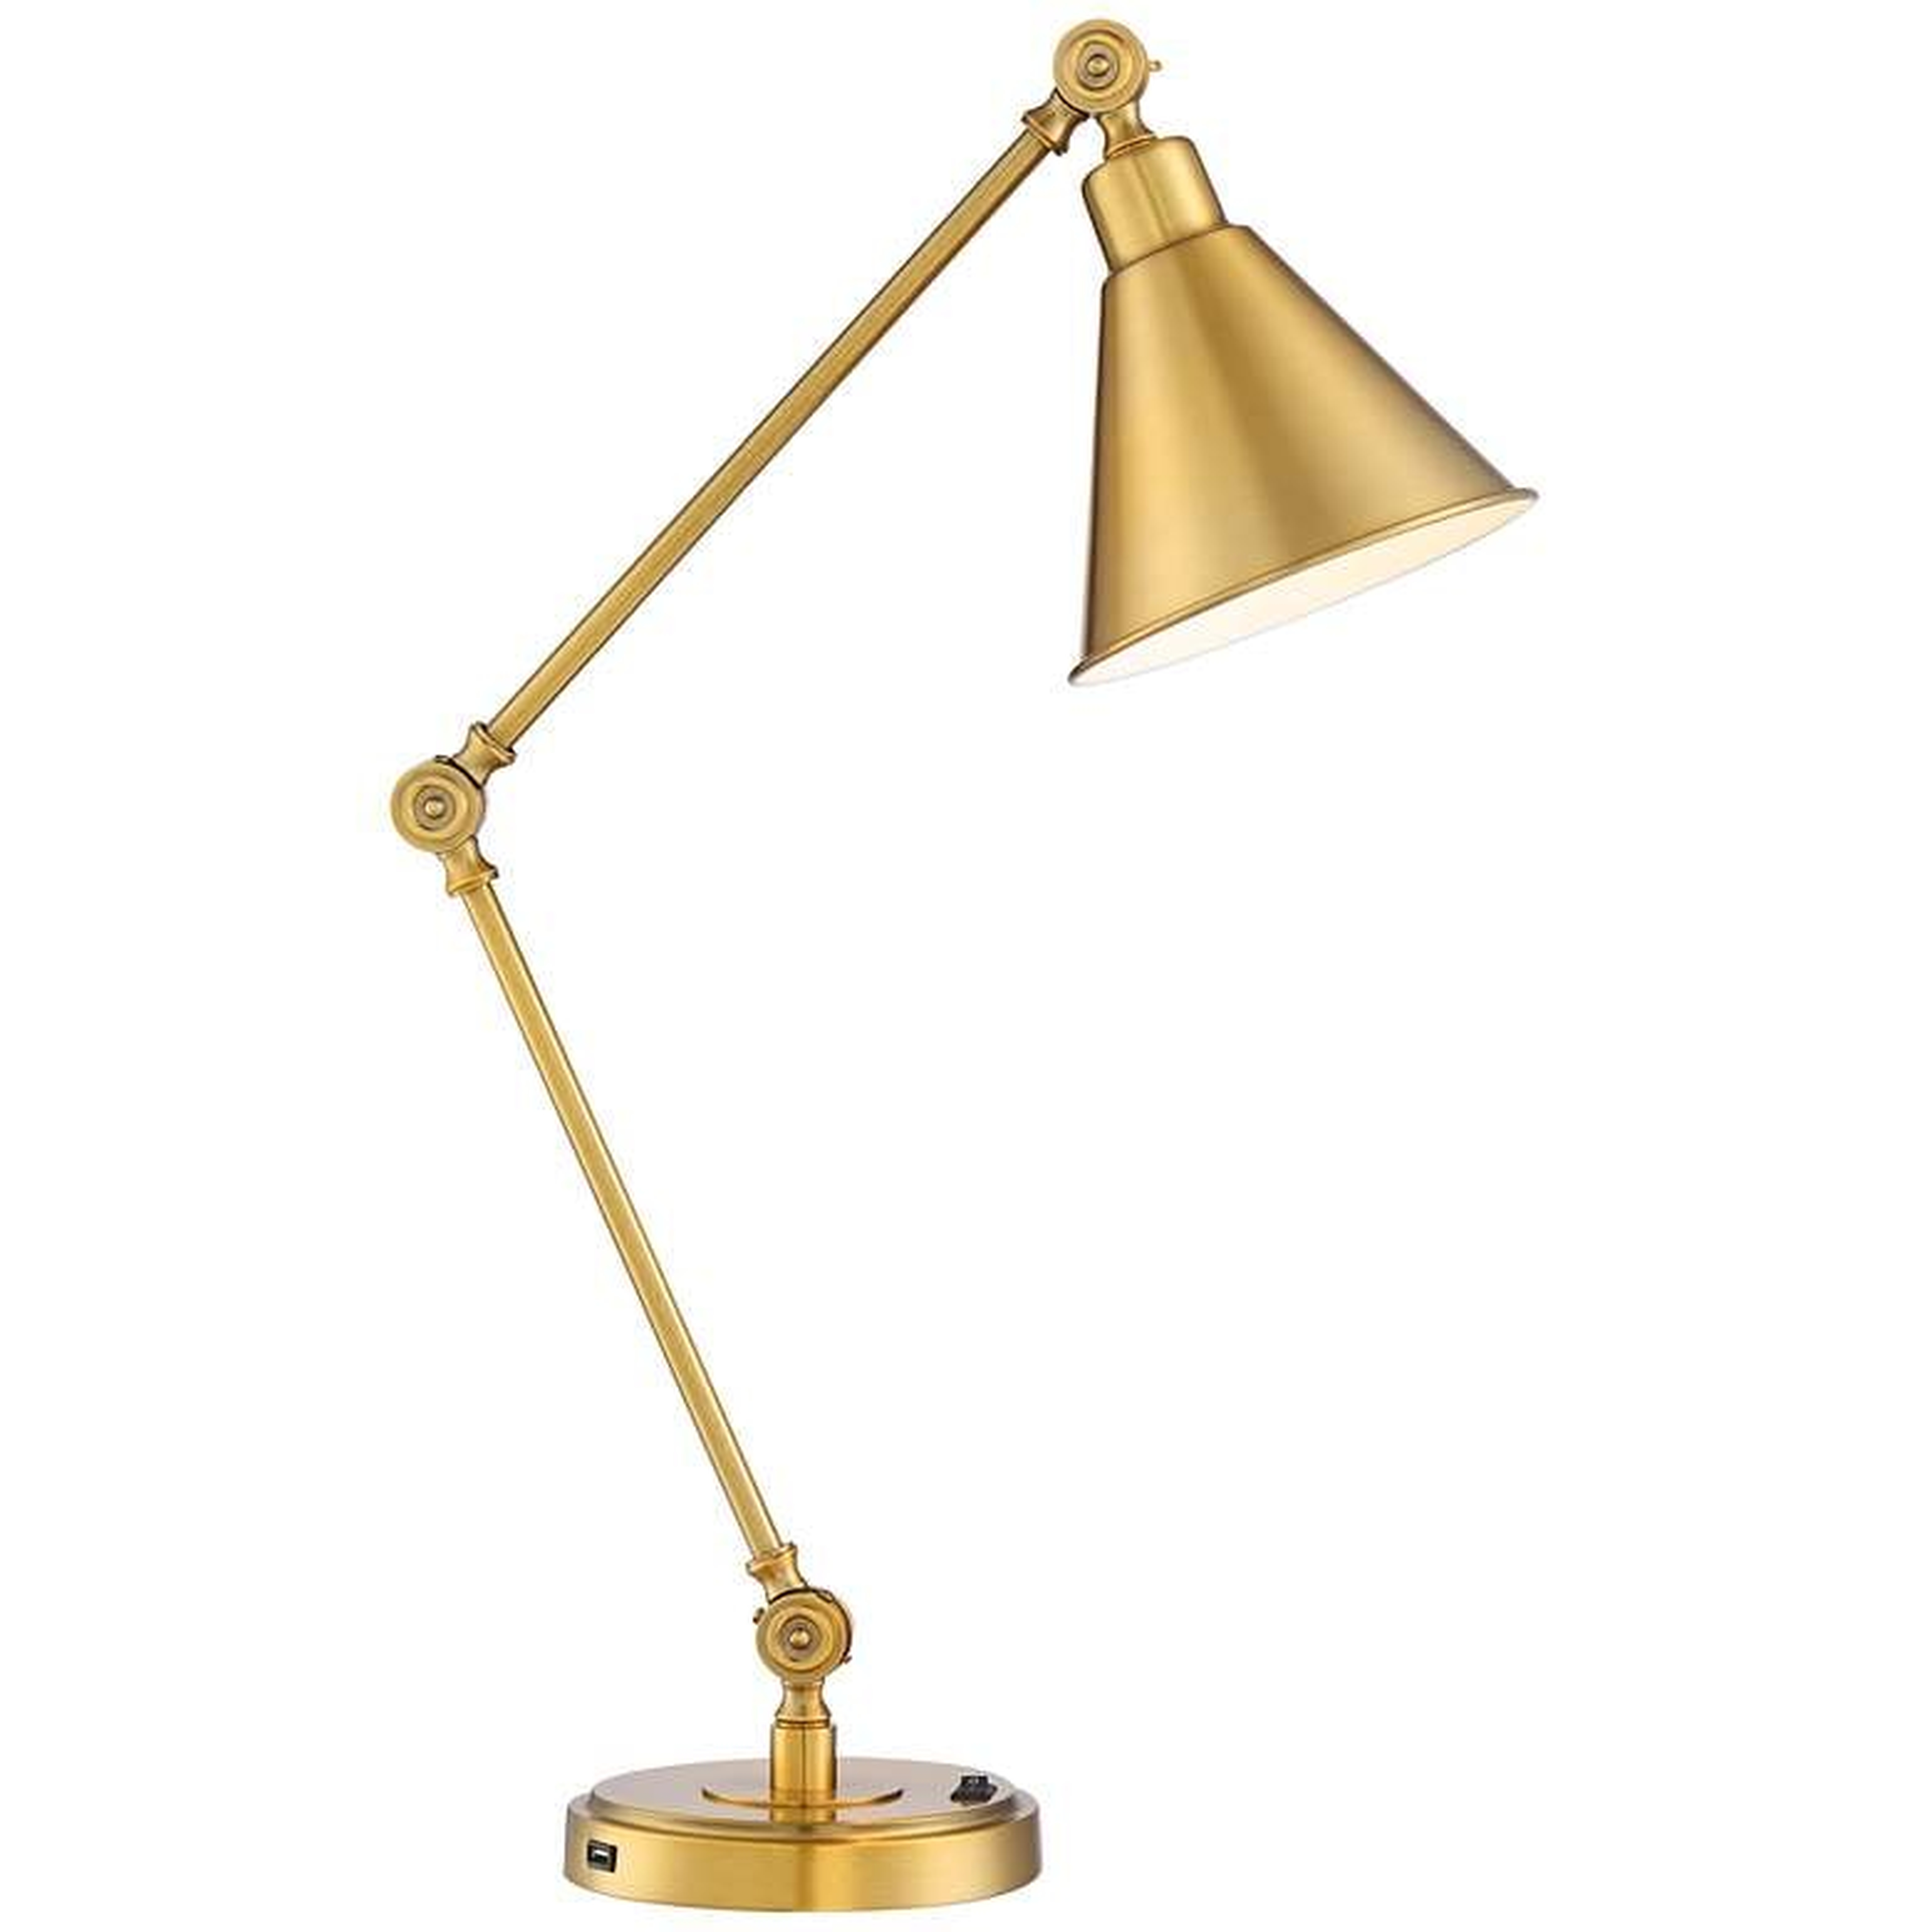 Wray Warm Antique Brass Desk Lamp with USB Port - Lamps Plus